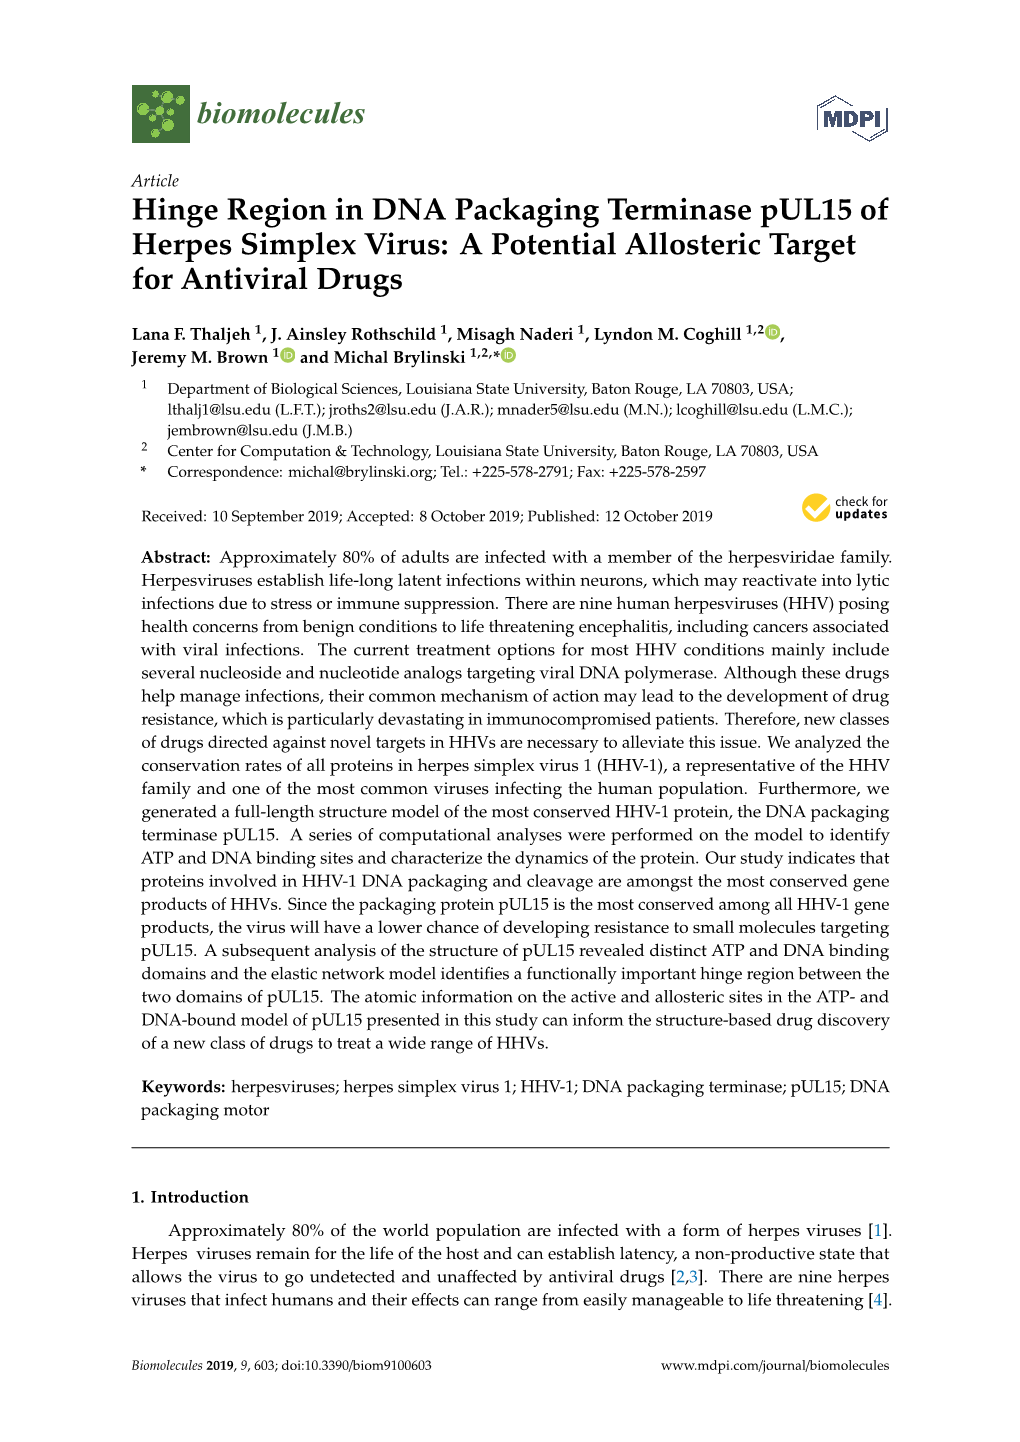 Hinge Region in DNA Packaging Terminase Pul15 of Herpes Simplex Virus: a Potential Allosteric Target for Antiviral Drugs